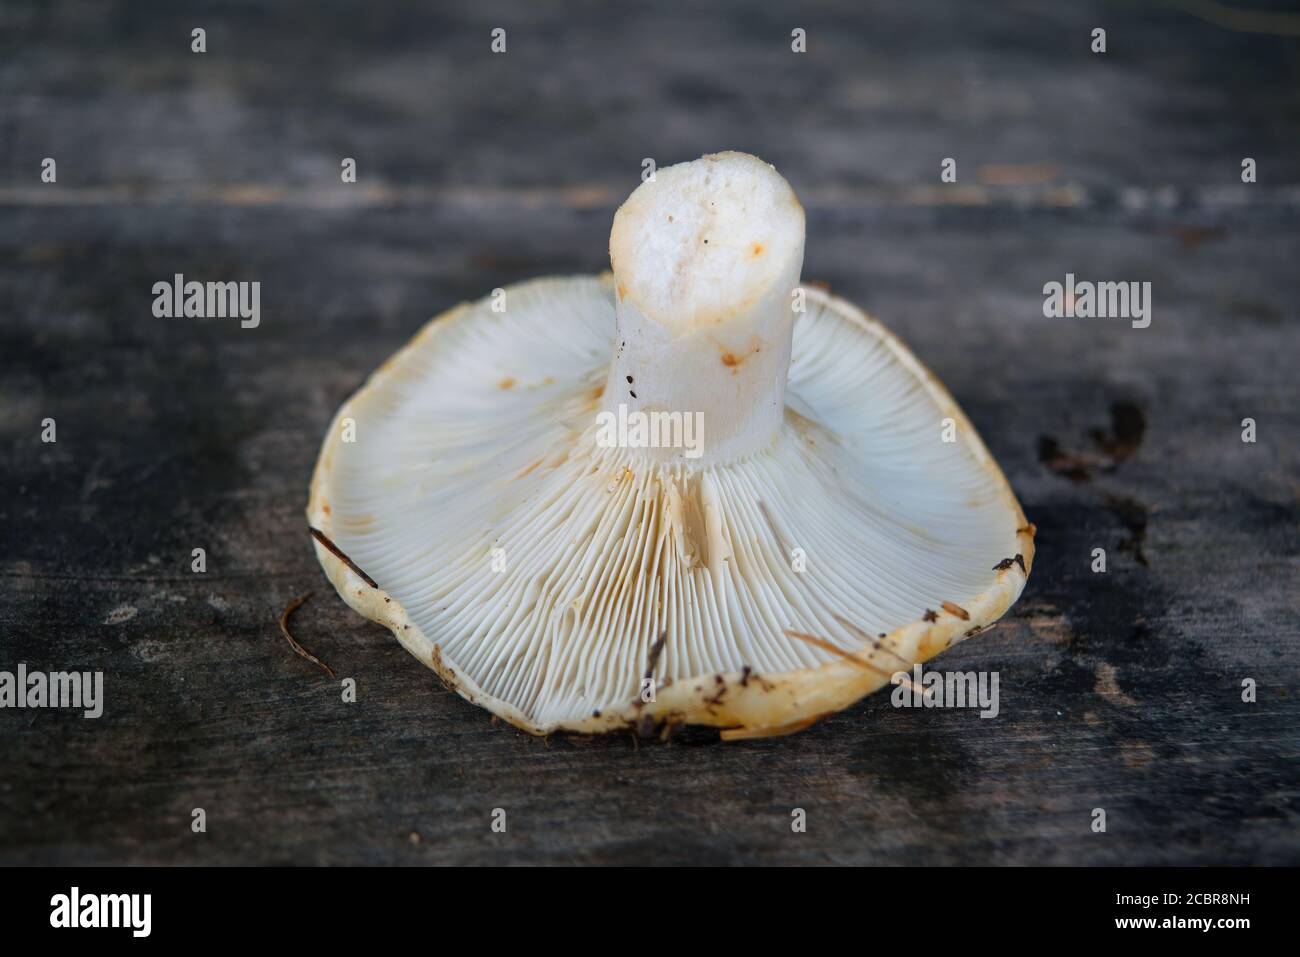 Russula mushrooms on the background of an old wooden table. Stock Photo